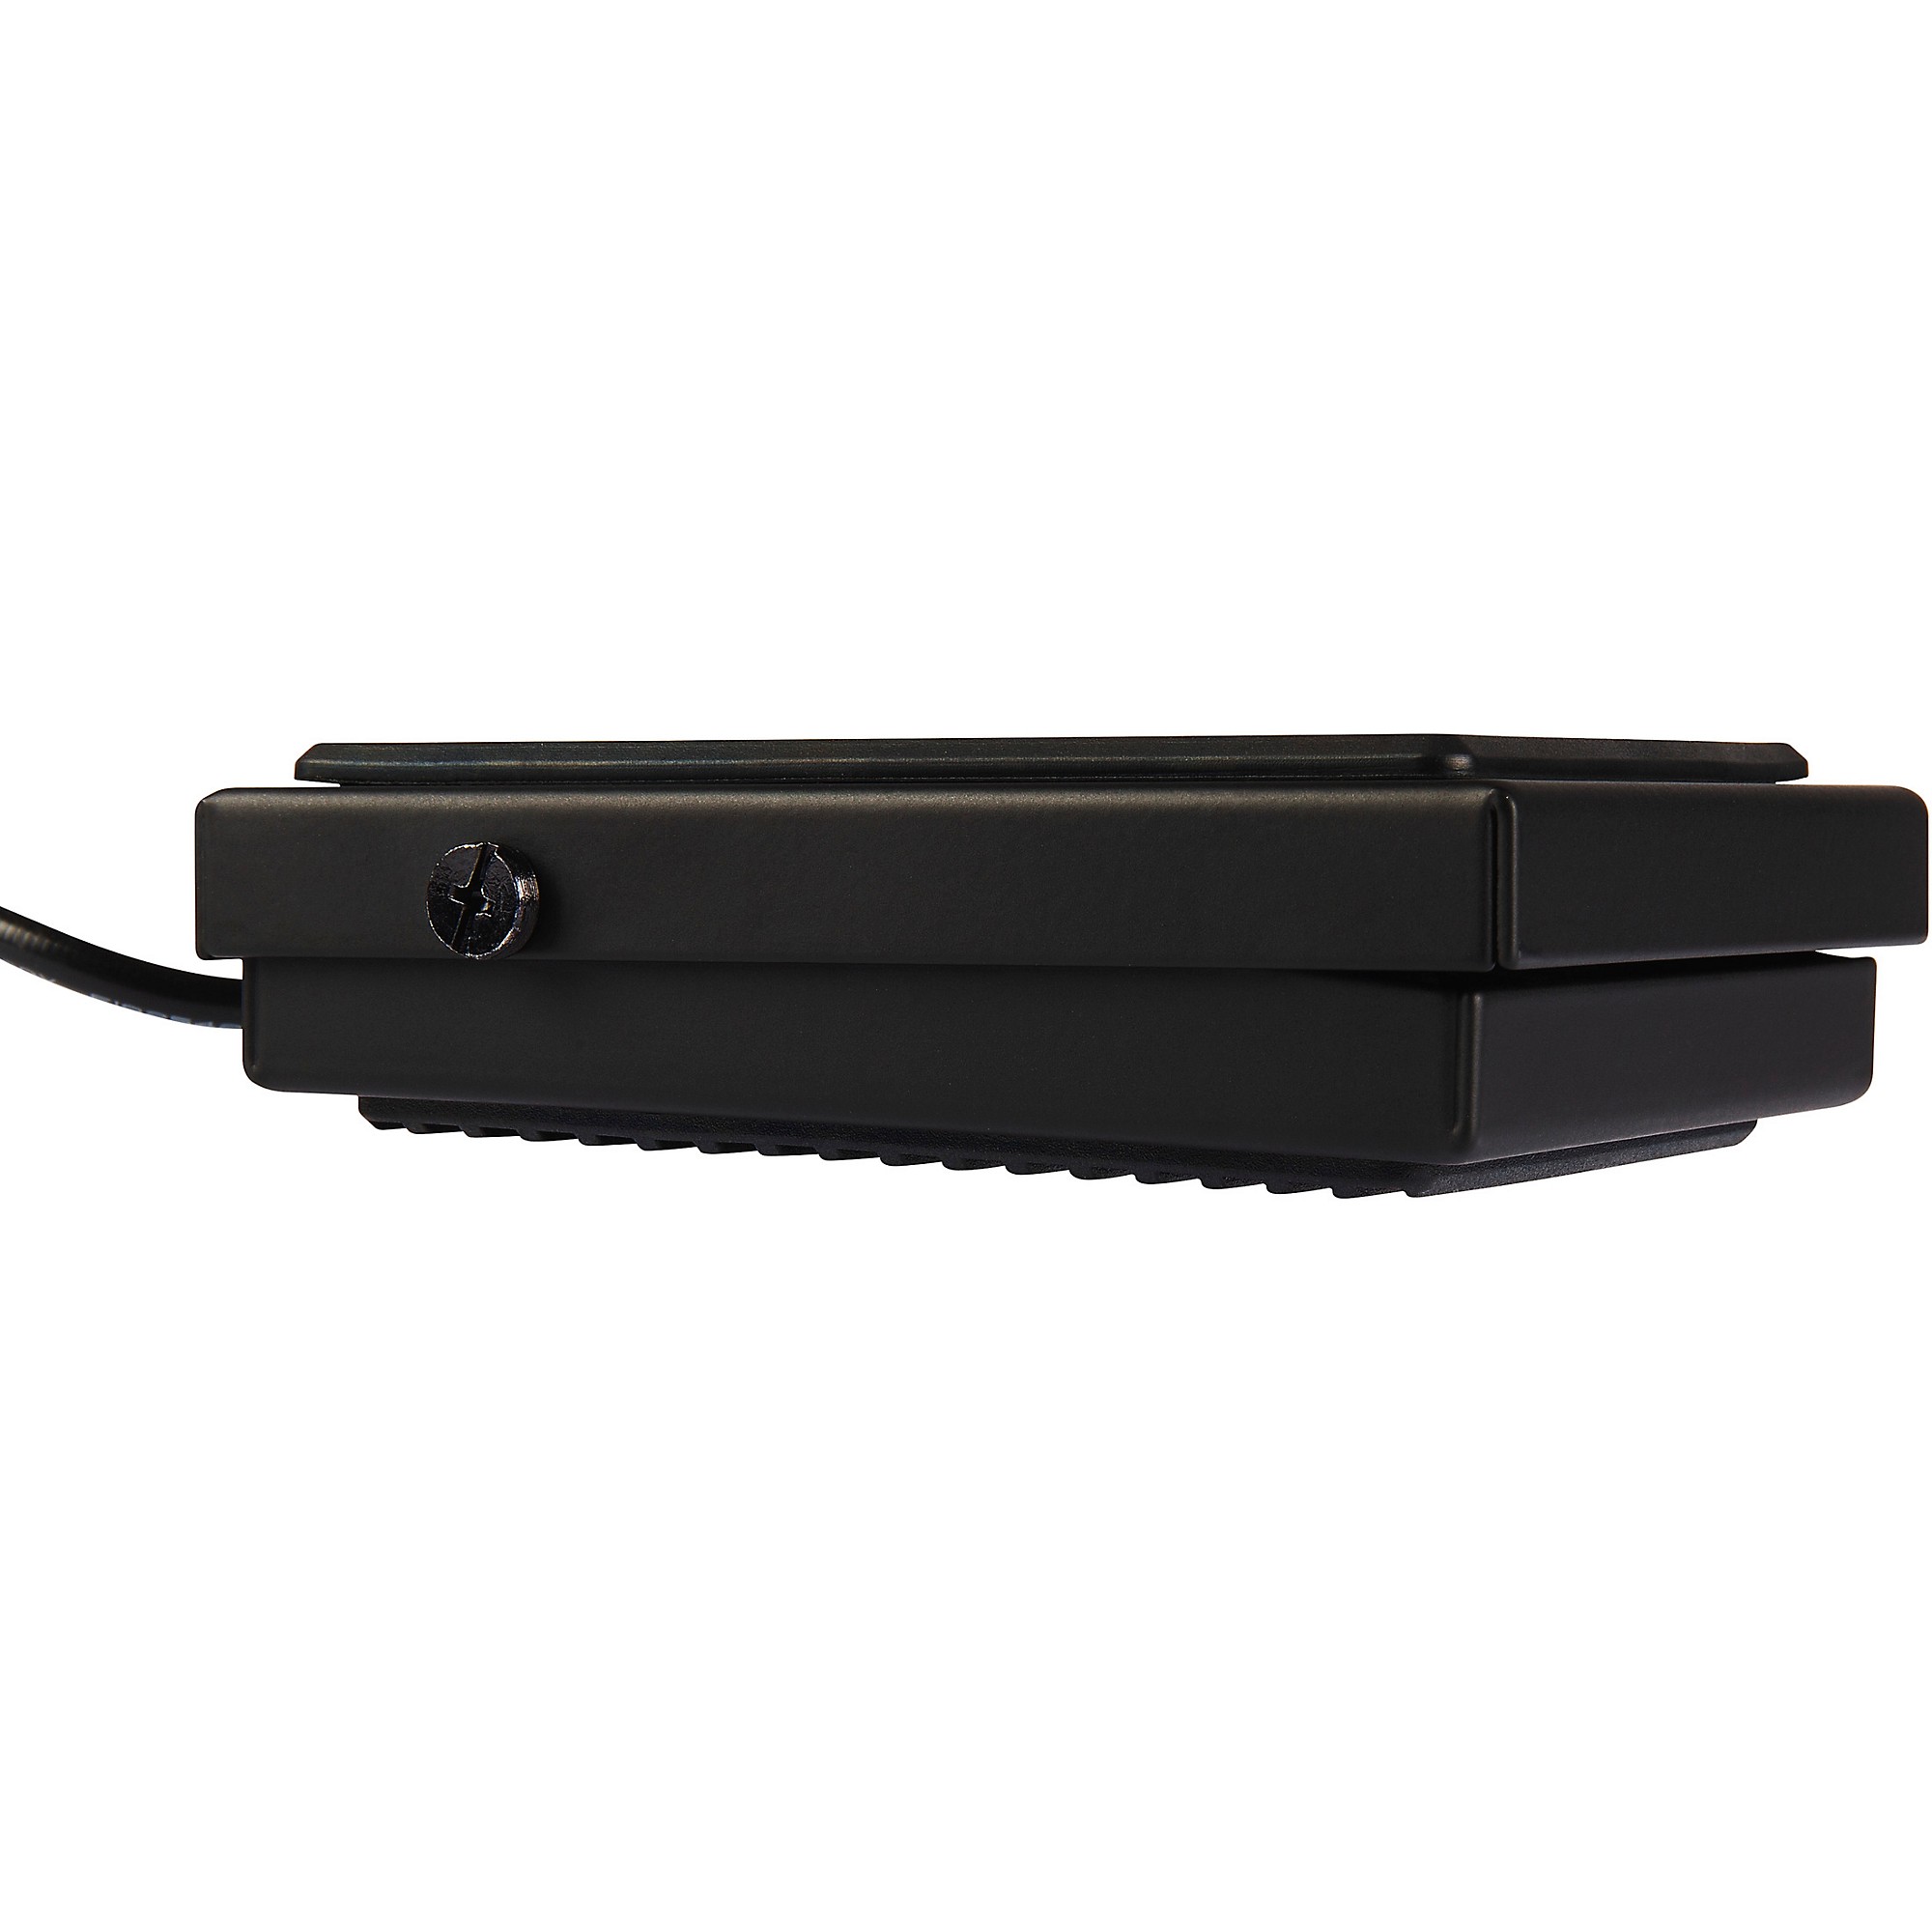 Proline Universal Piano-Style Sustain Pedal with Polarity Switch